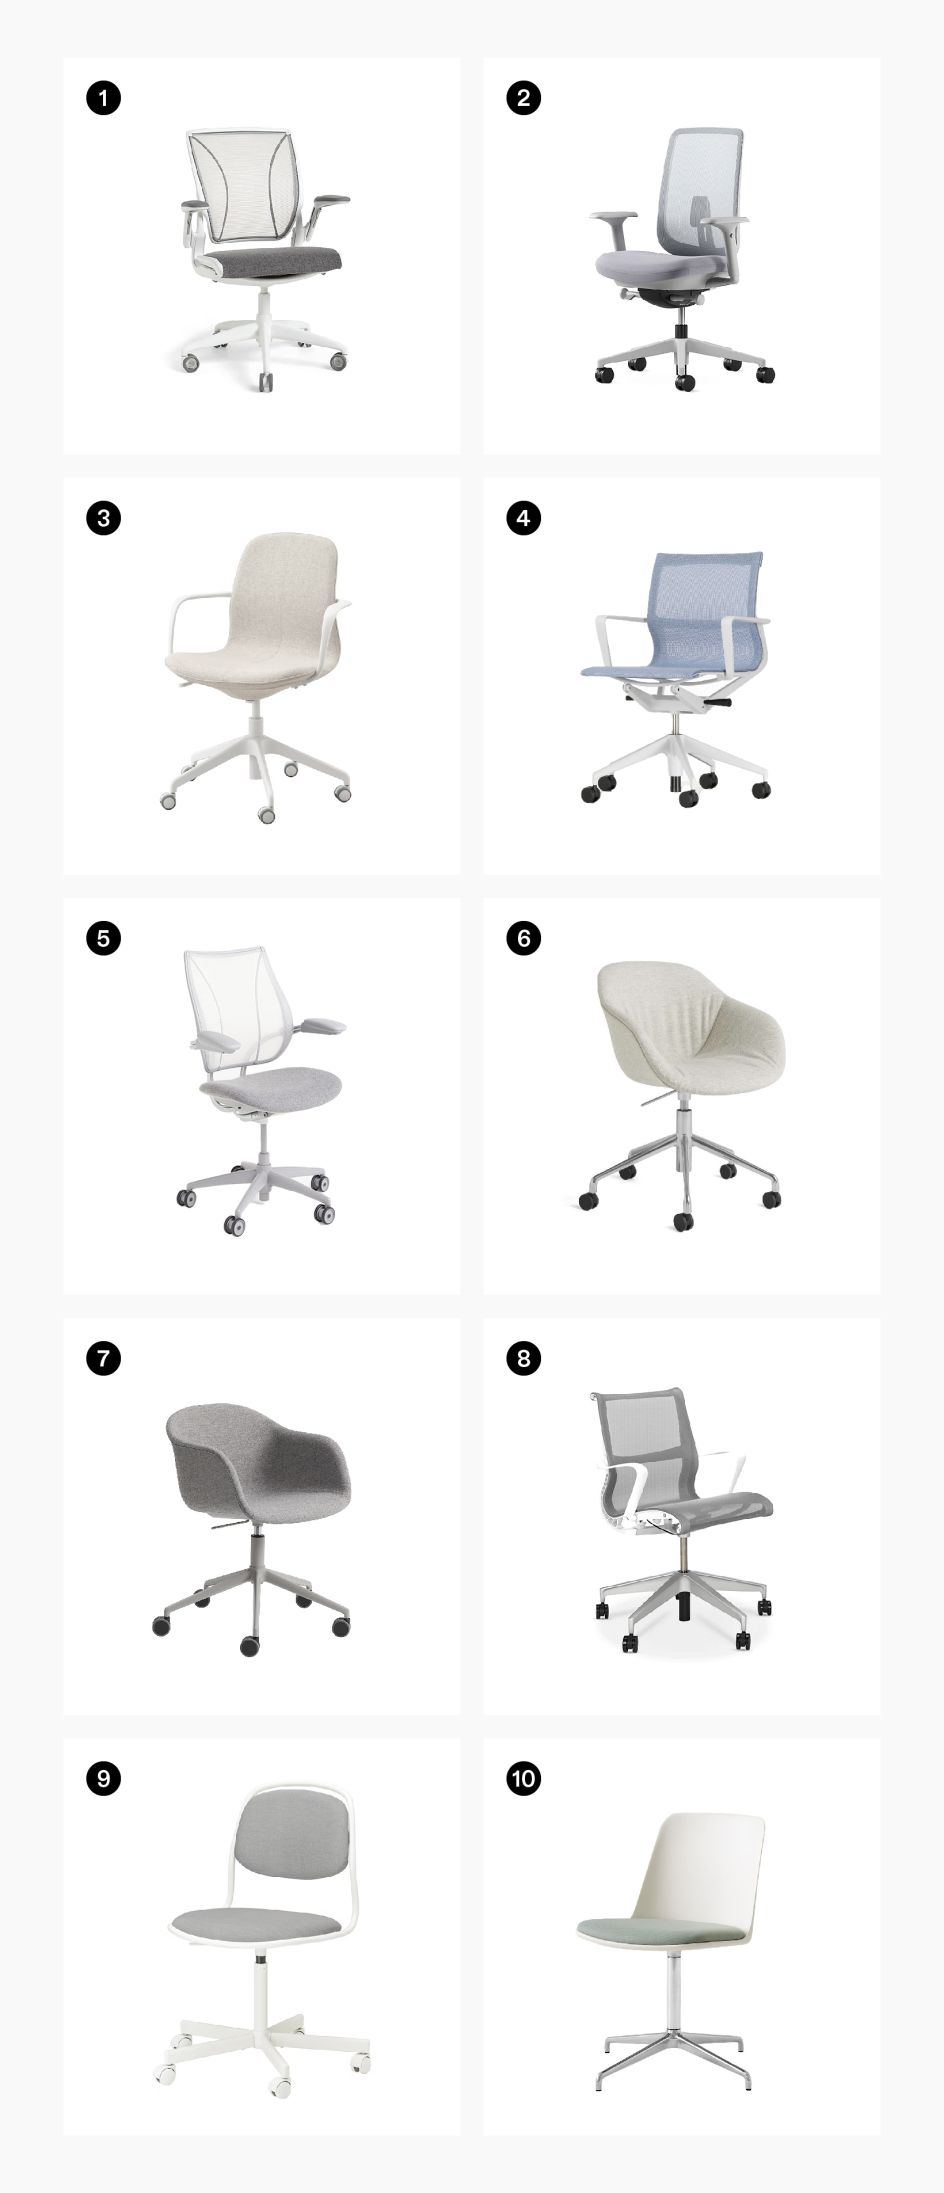 Comfortable and Ergonomic Recycled Chairs for All Body Types